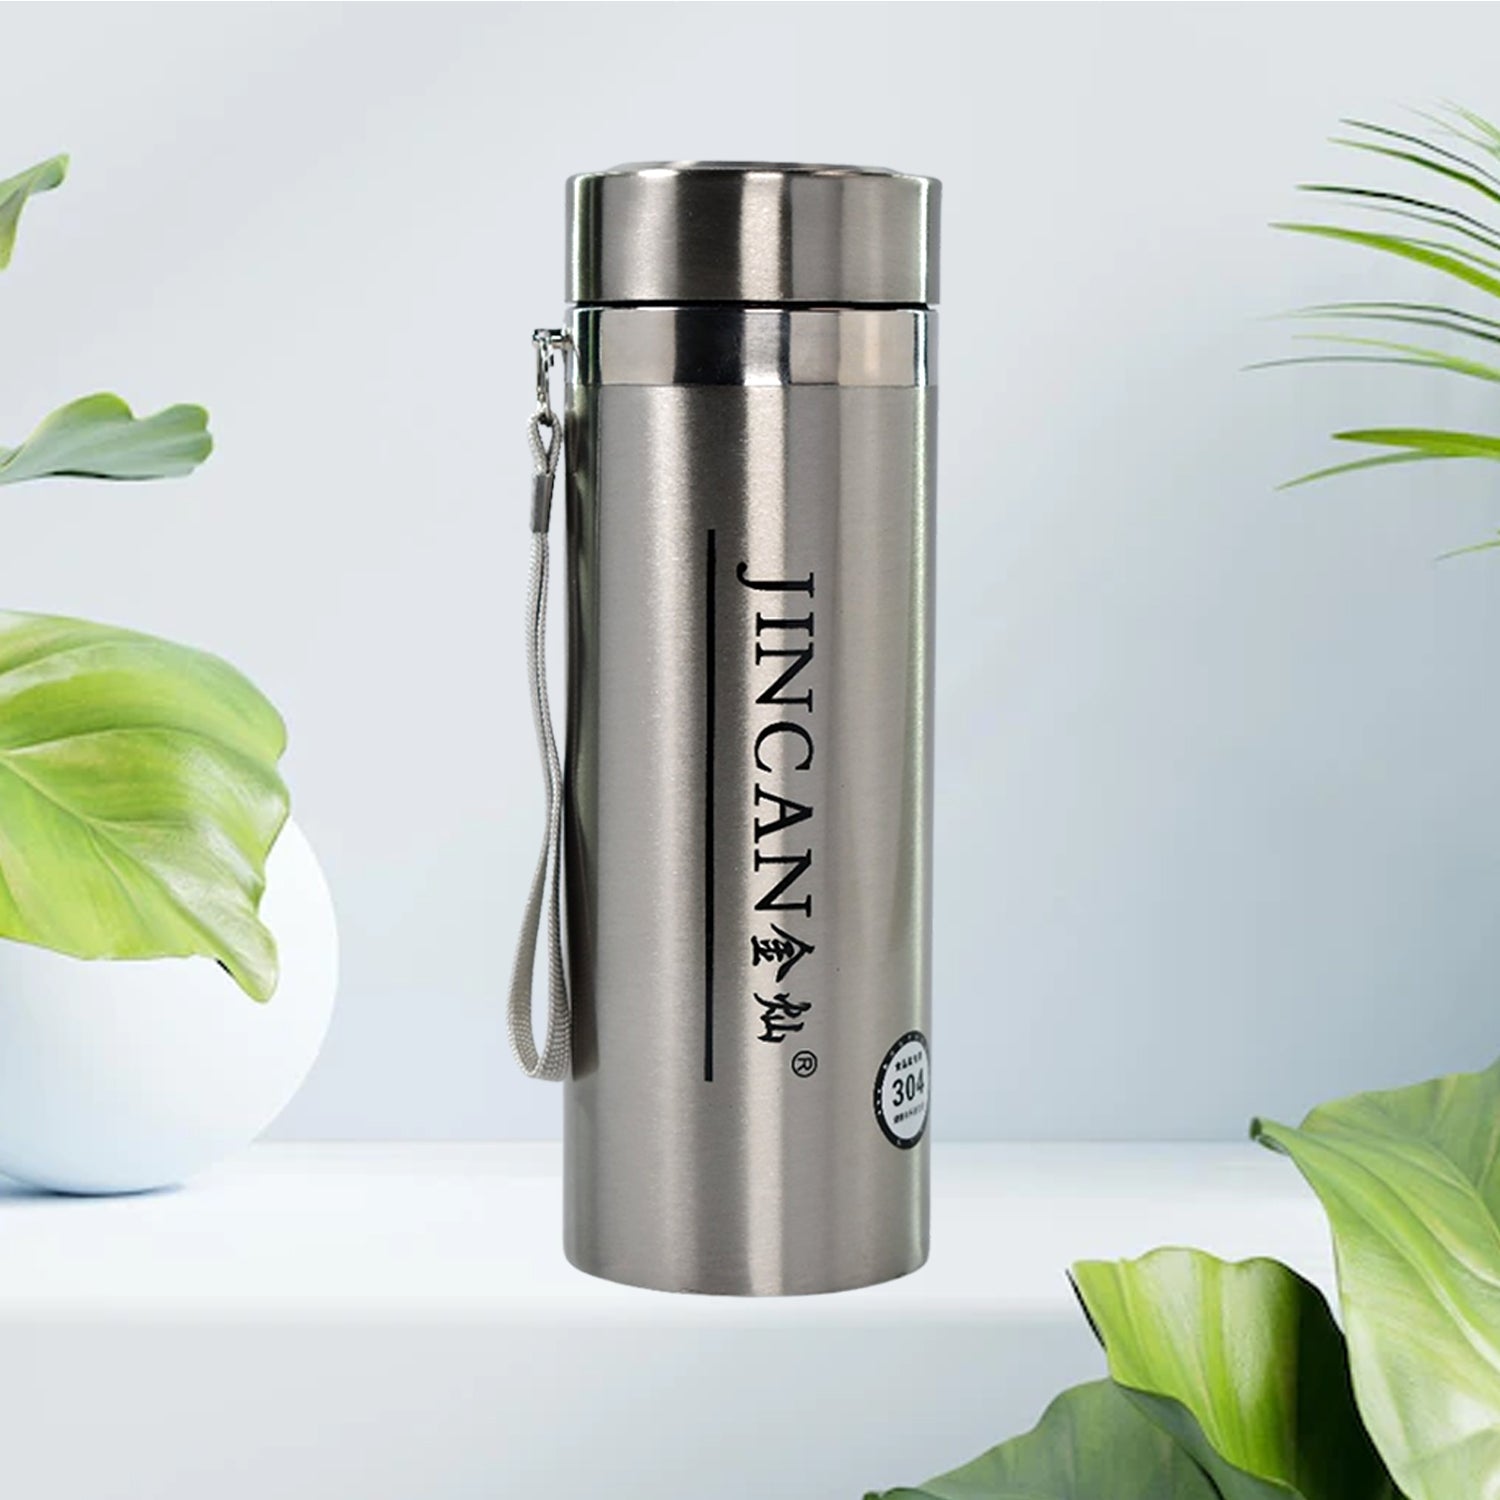 6447 350ML STAINLESS STEEL WATER BOTTLE FOR MEN WOMEN KIDS | THERMOS FLASK | REUSABLE LEAK-PROOF THERMOS STEEL FOR HOME OFFICE GYM FRIDGE TRAVELLING DeoDap